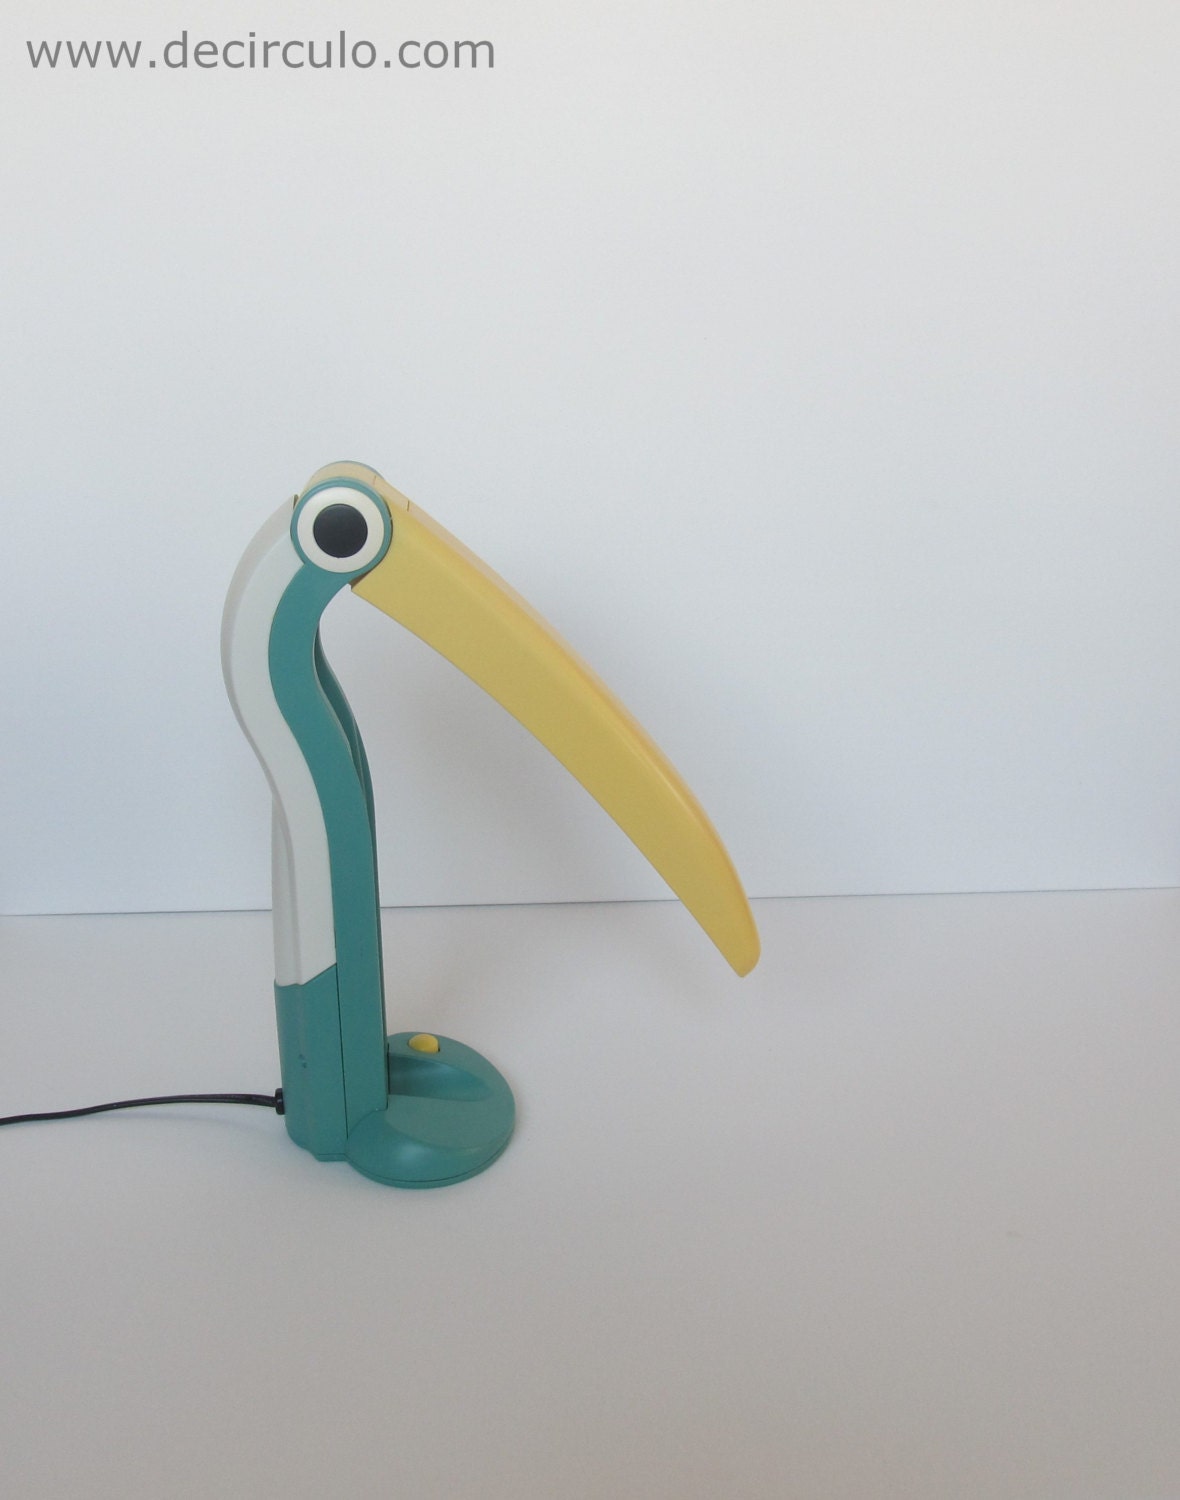 Retro toucan pelican desk table Lamp from huangslite, 1980's vintage great lighting for childrensroom bedroom or office workplace